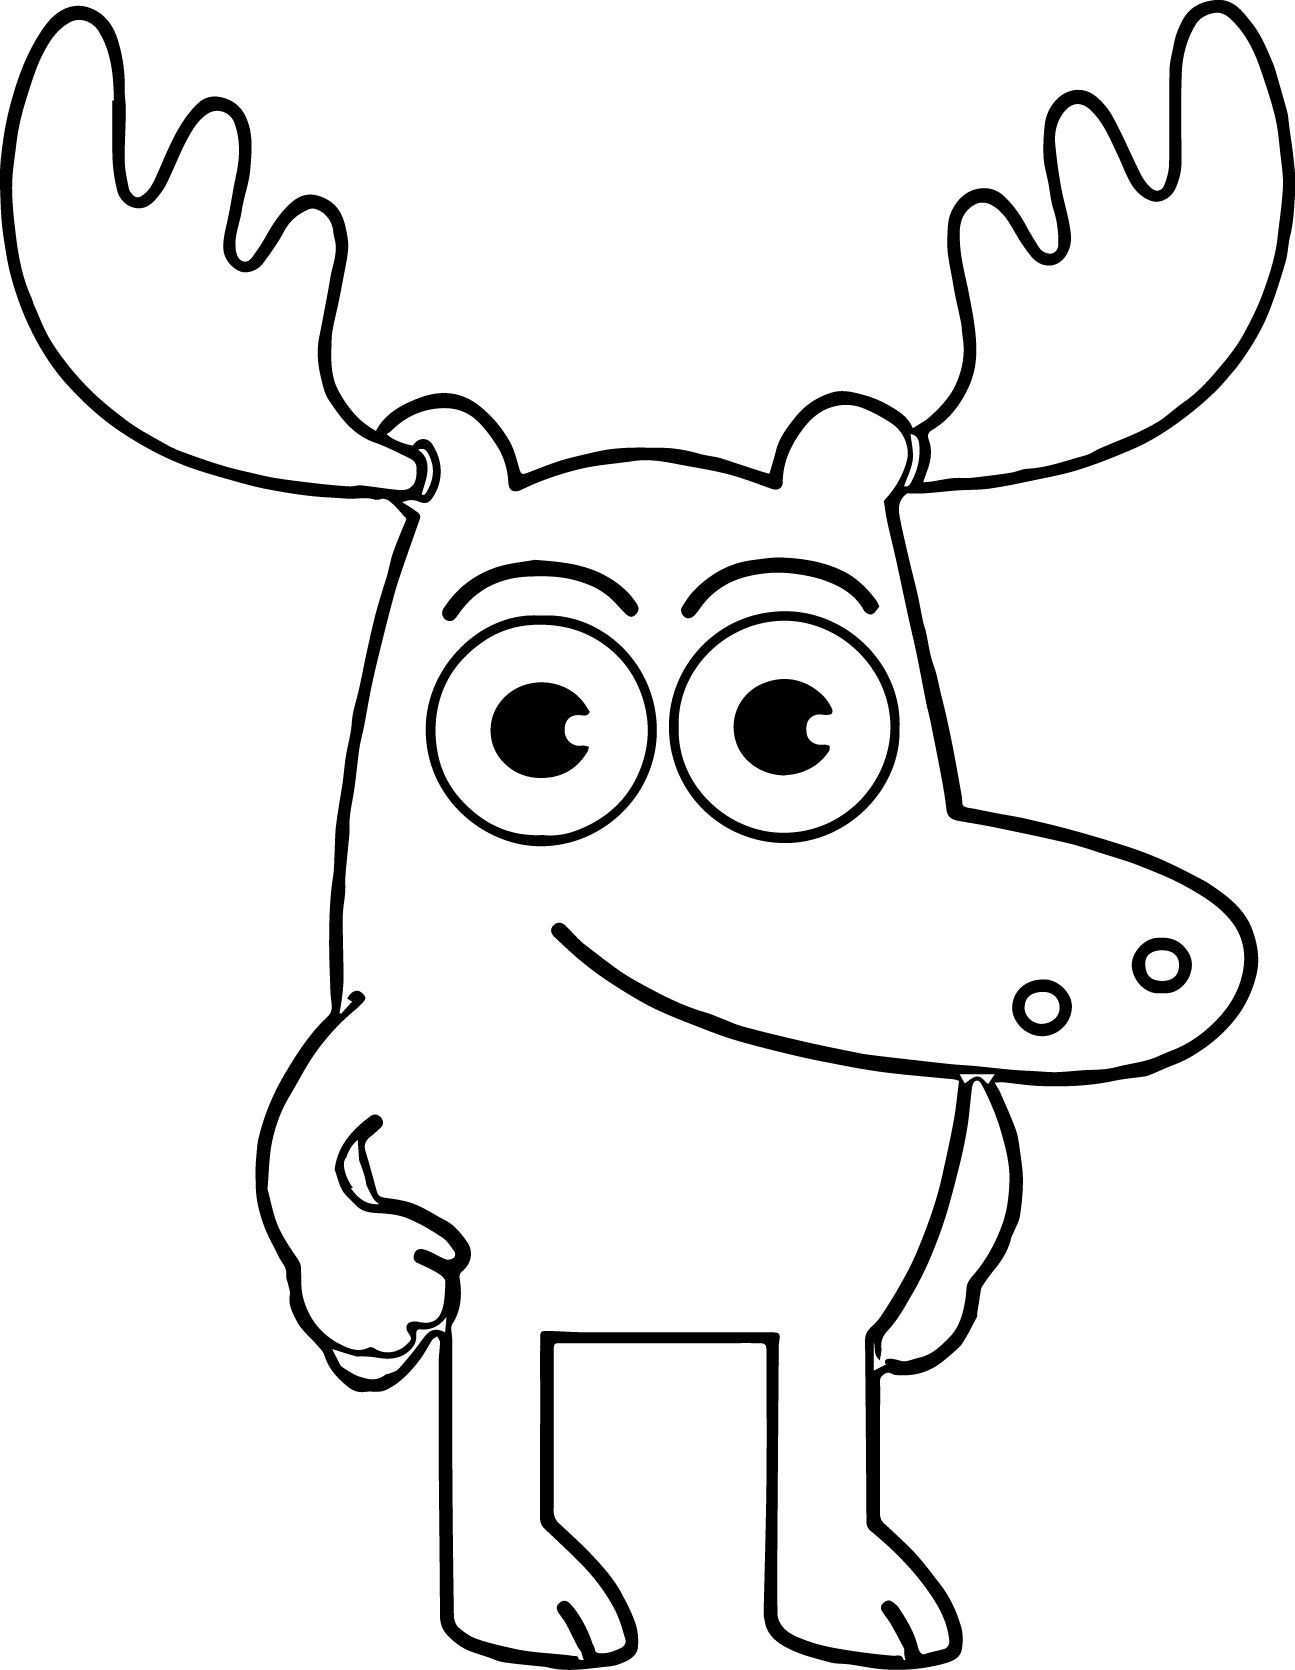 Moose Line Drawing | Free download on ClipArtMag